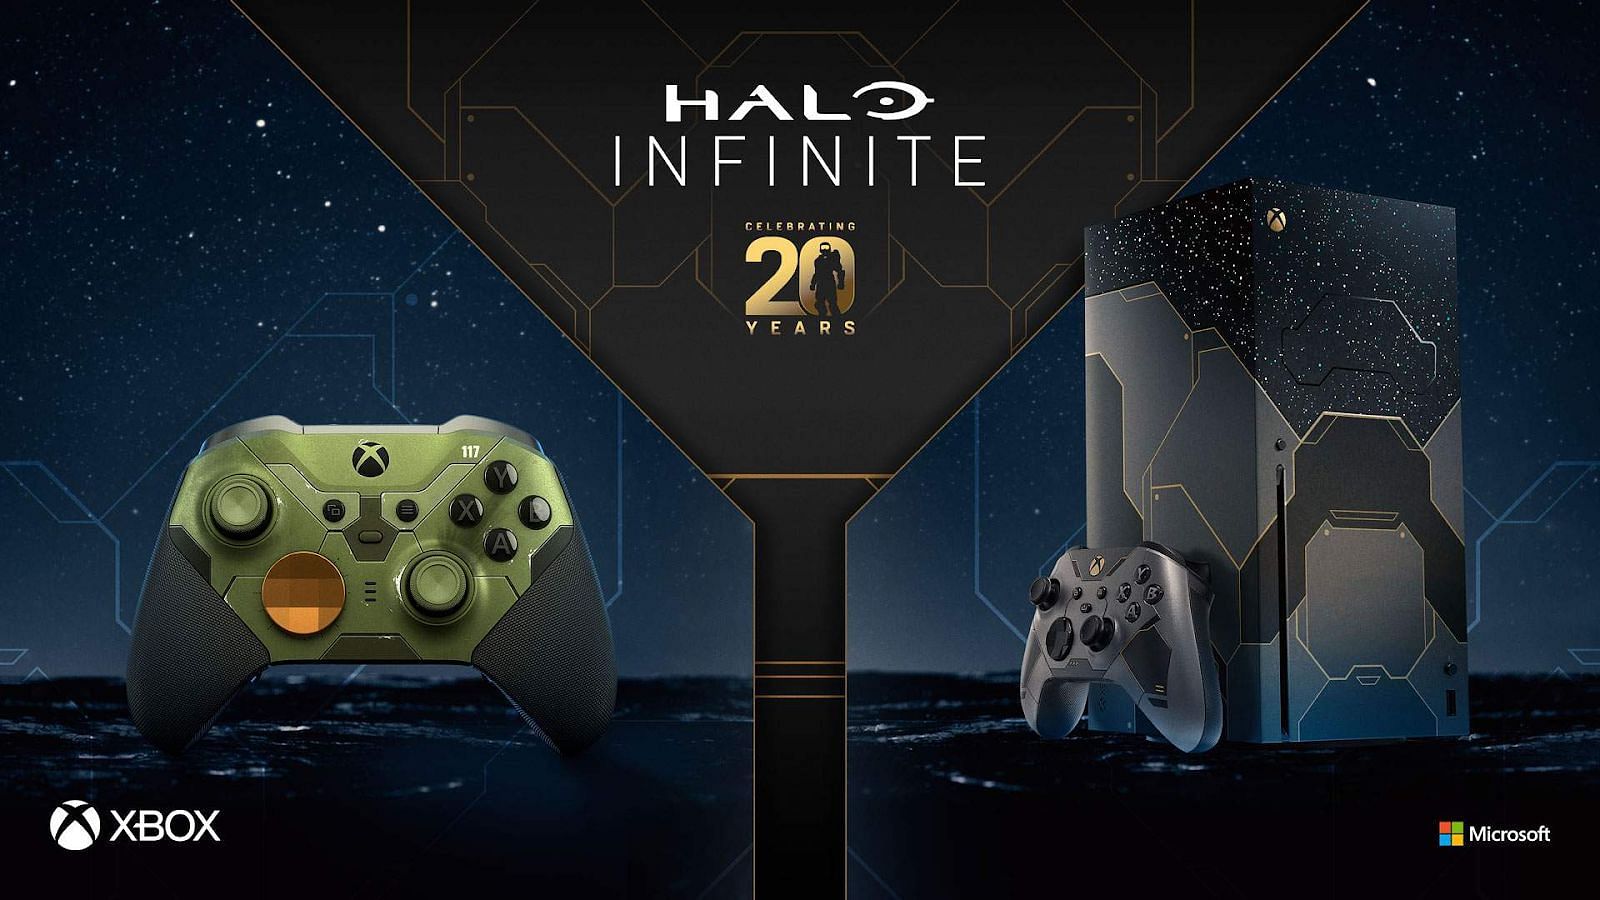 Halo Infinite Elite Controller and Special Edition Xbox Series X (Image by Xbox)